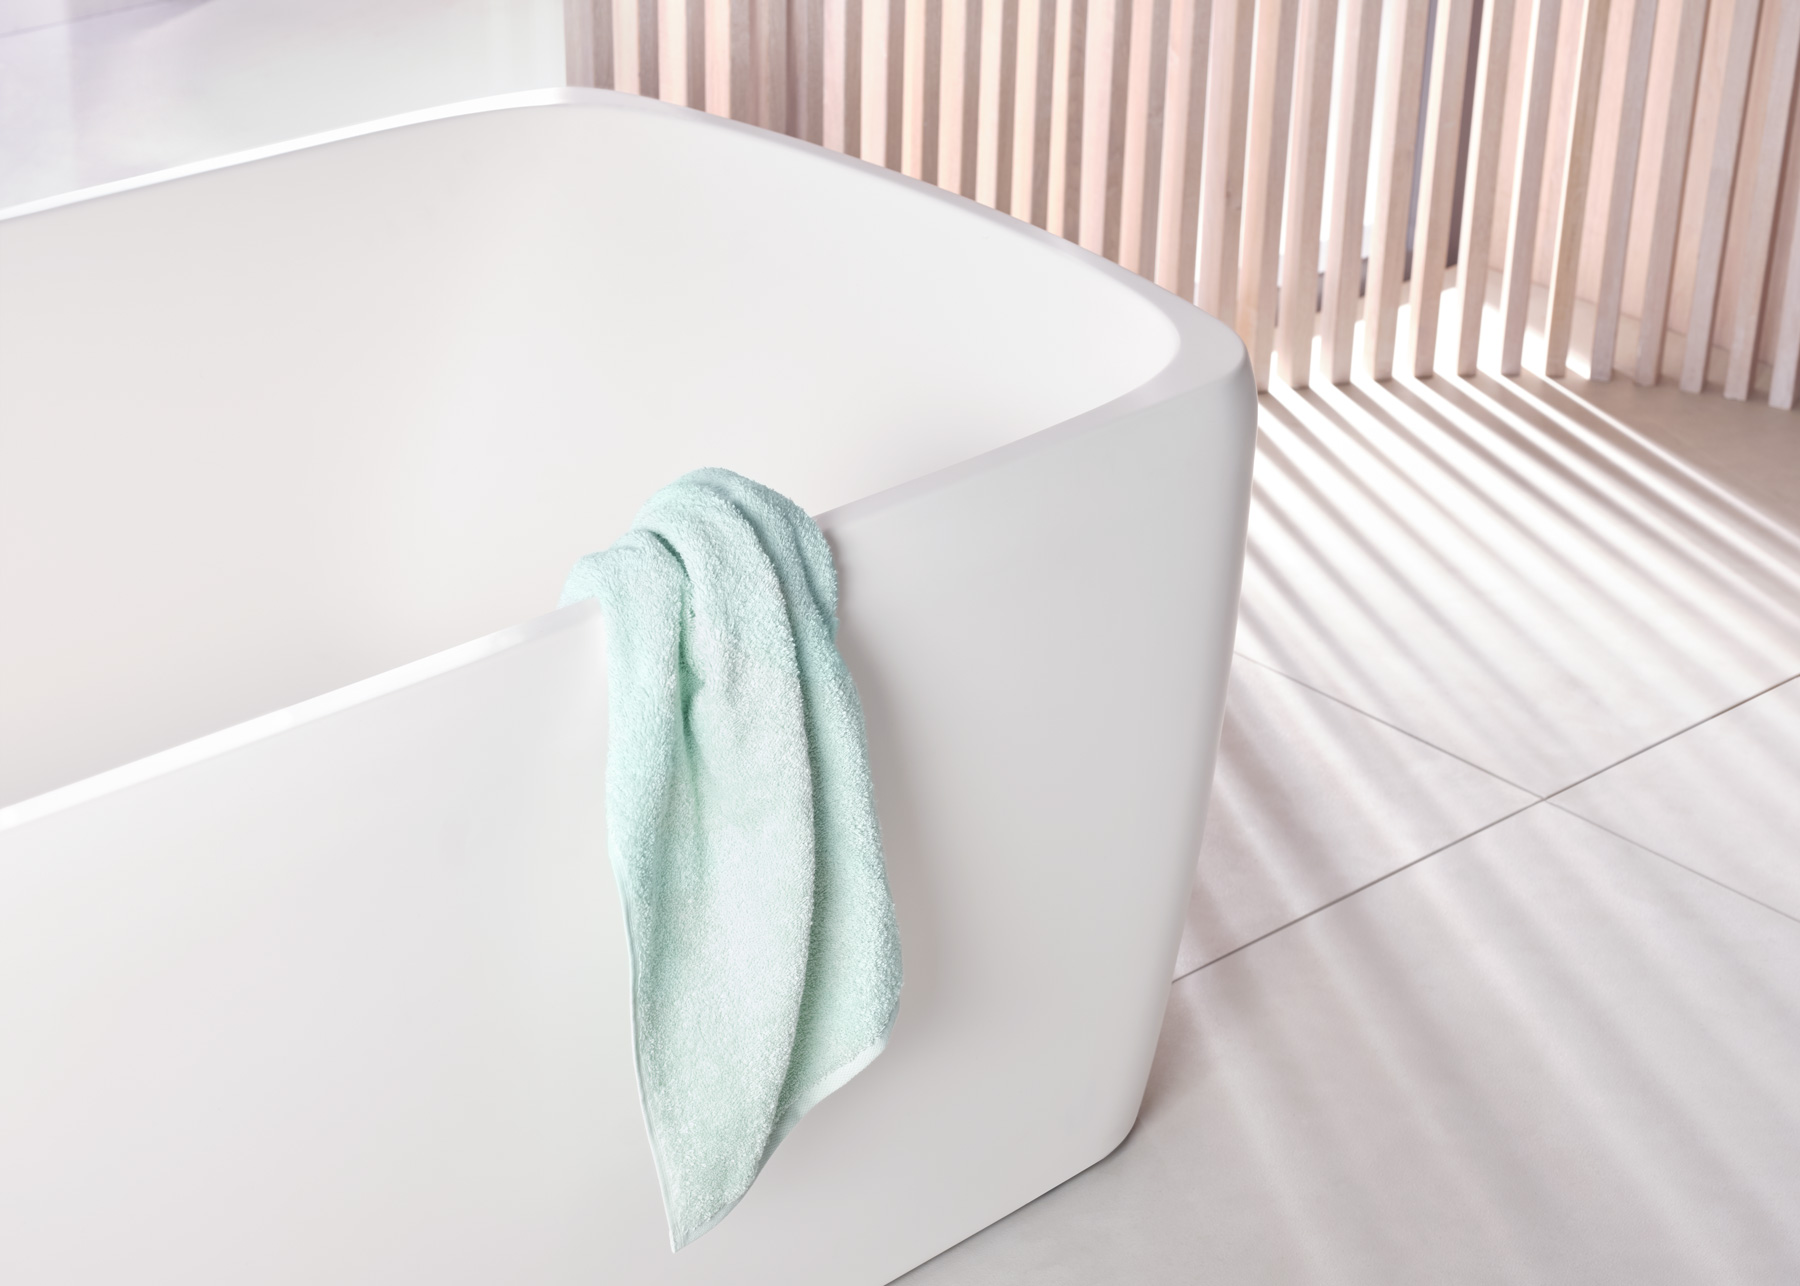 Bathtub with DuroCast Plus mineral cast and pleasantly matt surface
